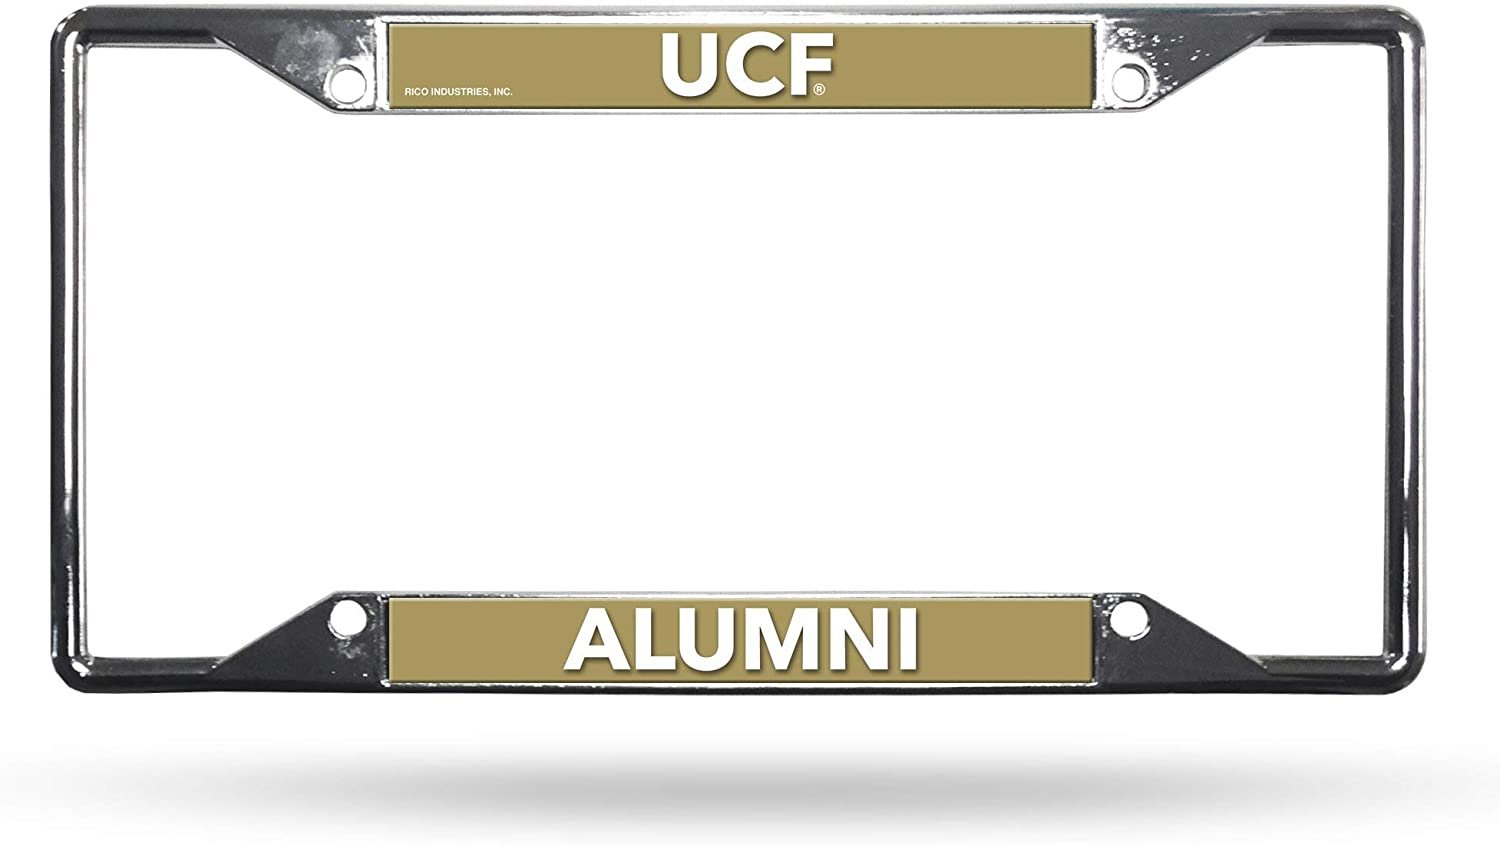 University of Central Florida UCF Knights Alumni Metal License Plate Frame Chrome Tag Cover, 12x6 Inch